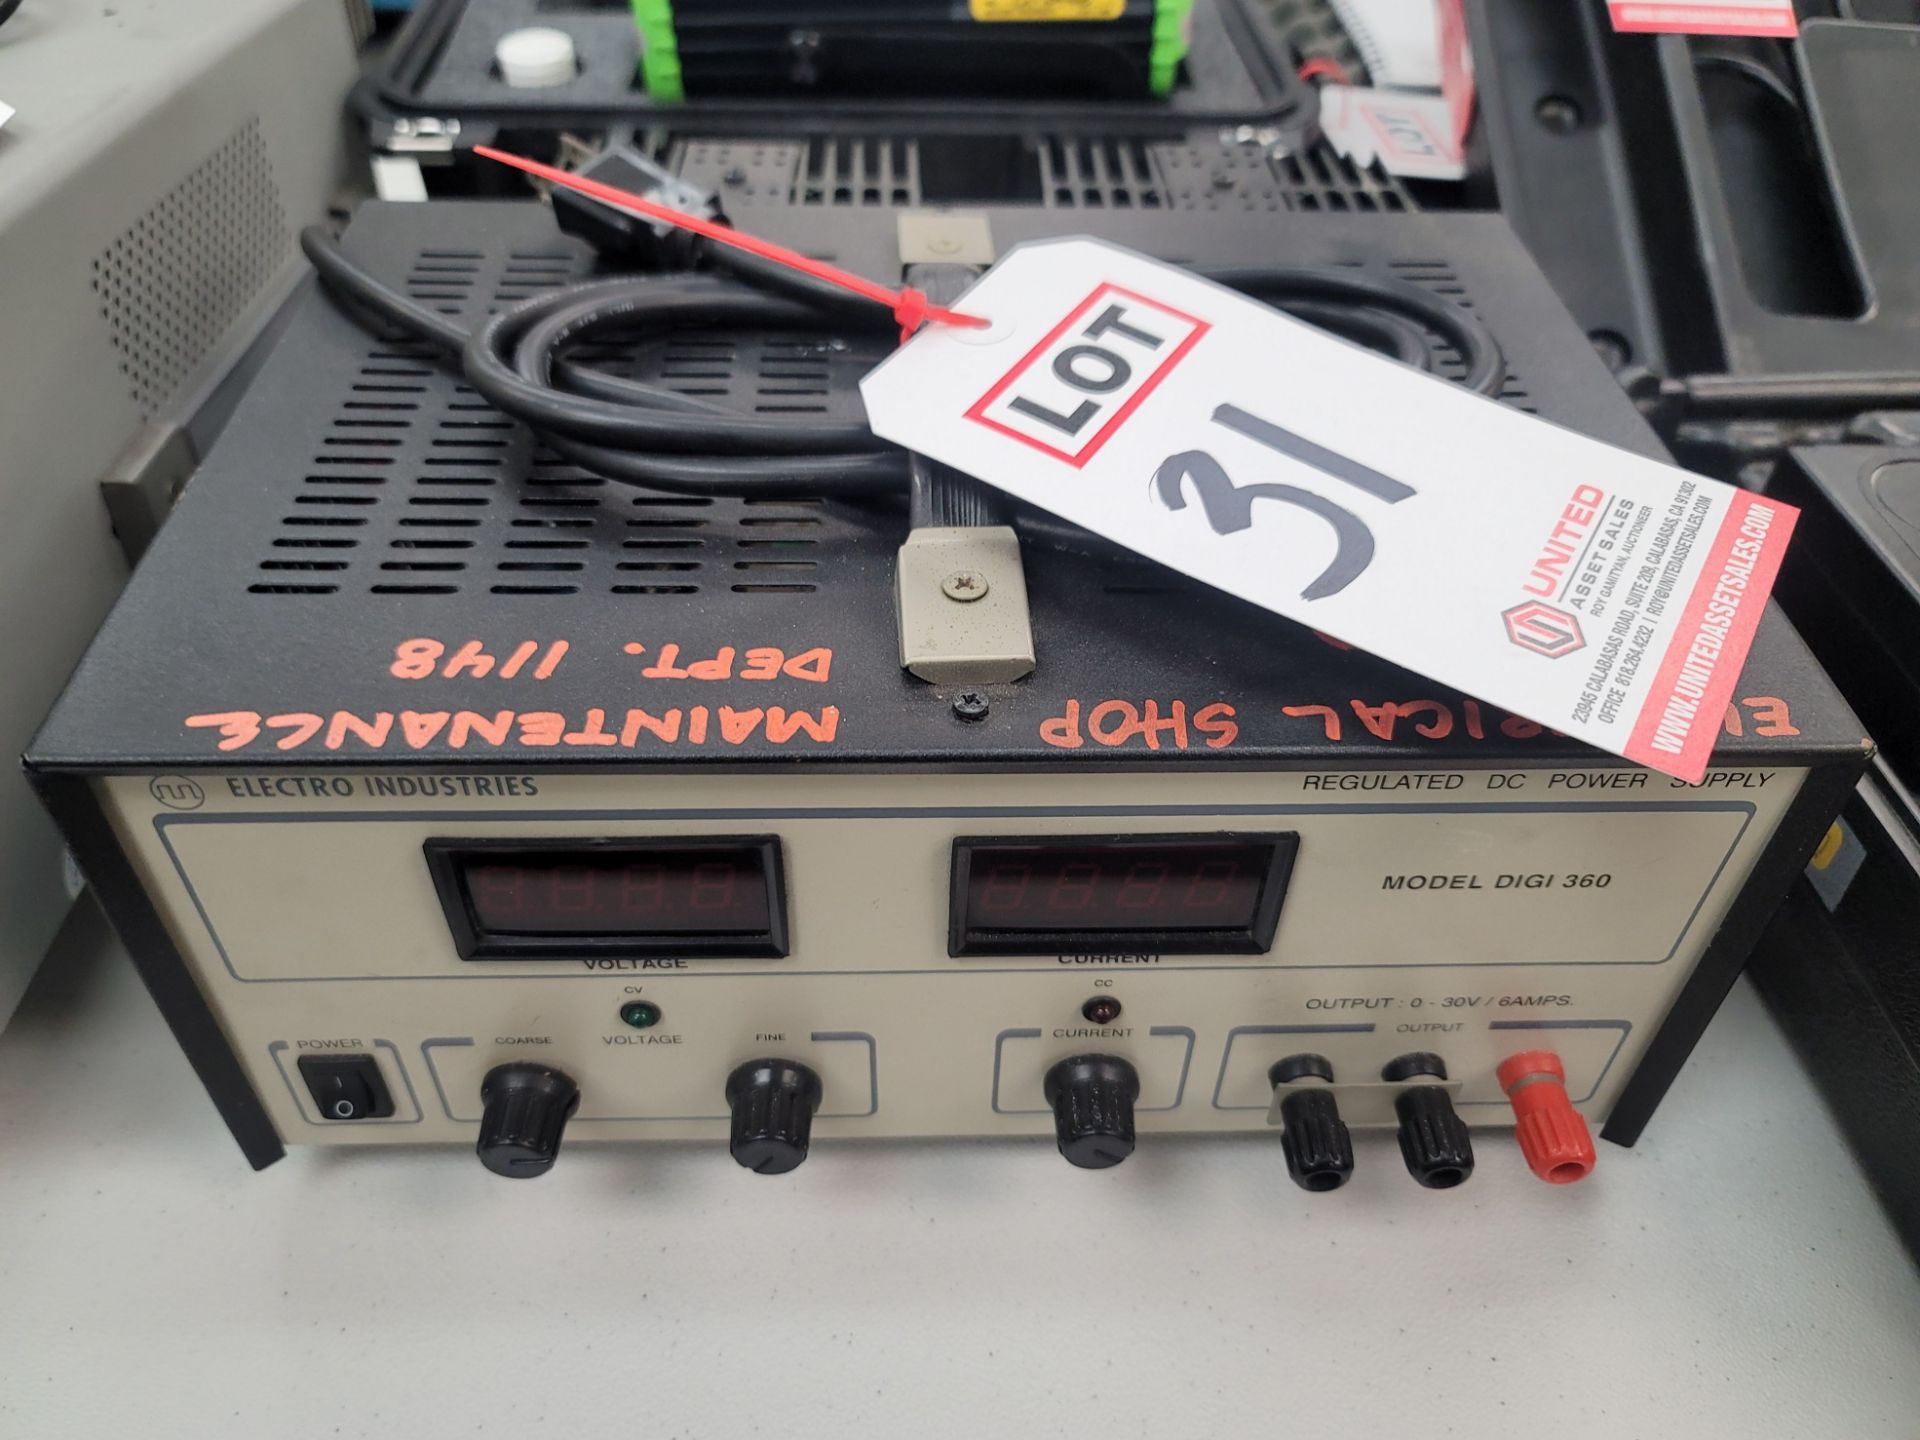 ELECTRO INDUSTRIES REGULATED DC POWER SUPPLY, MODEL DIGI 360, (BUILDING 25, QC LAB)